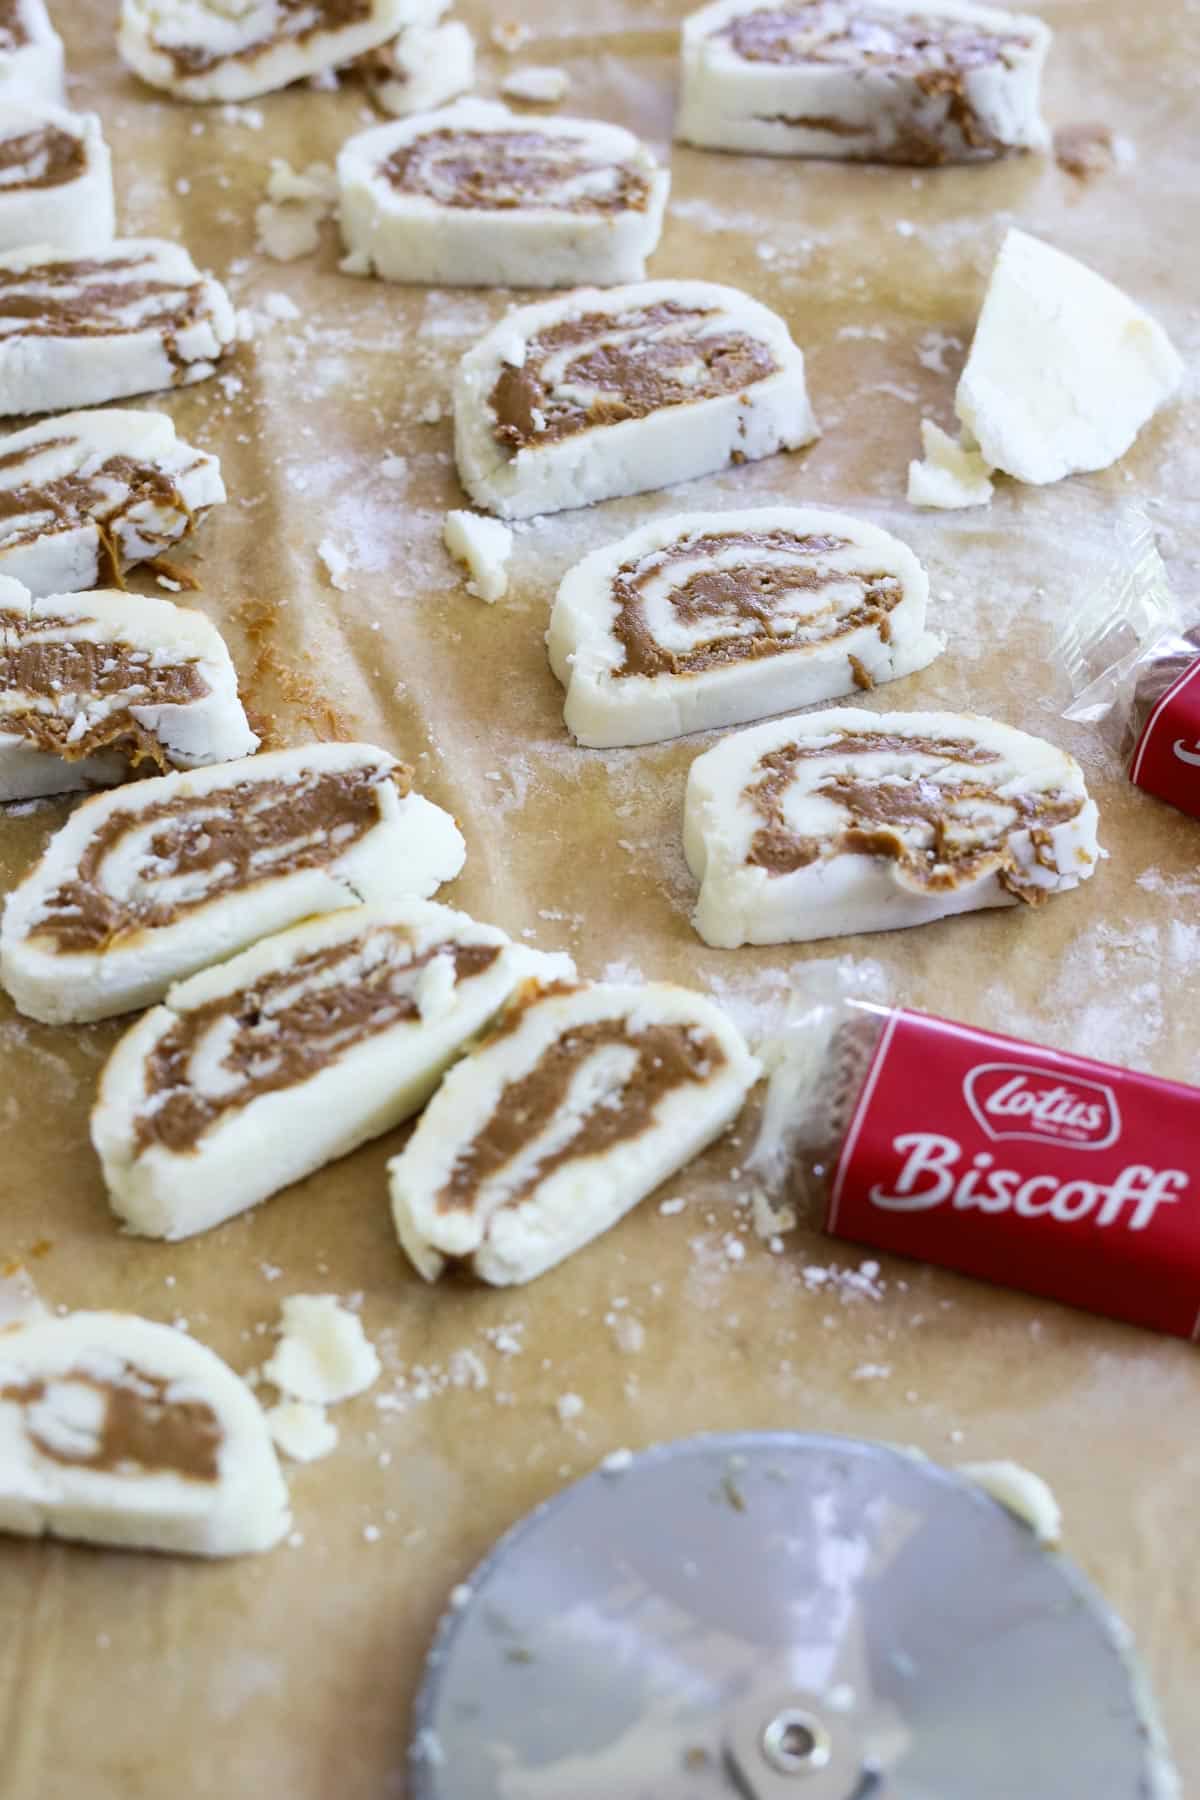 several pieces of Biscoff fudge candy on parchment paper